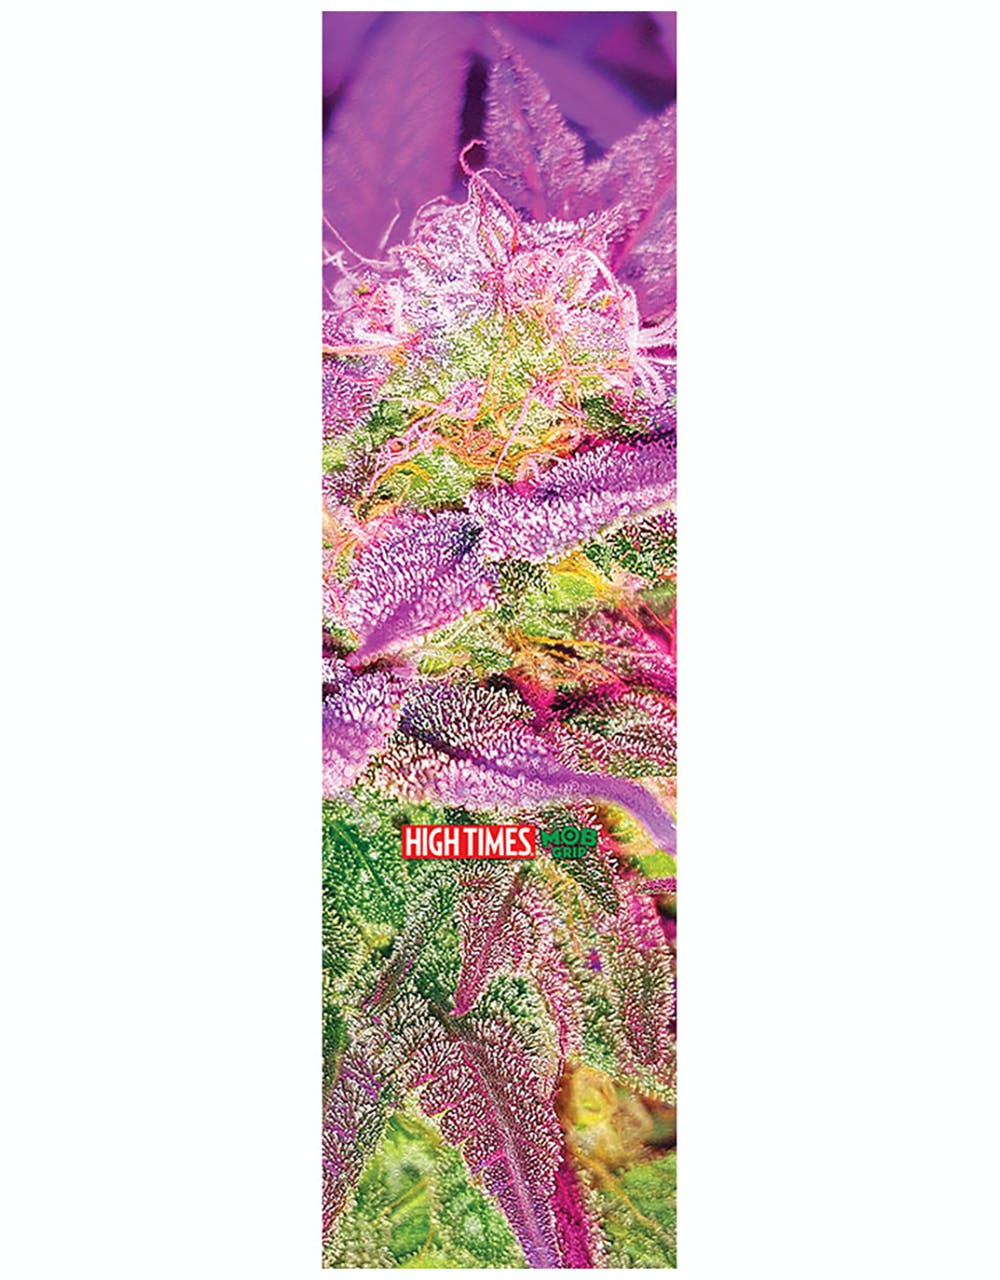 MOB x High Times Radioactive 9" Graphic Grip Tape Sheet